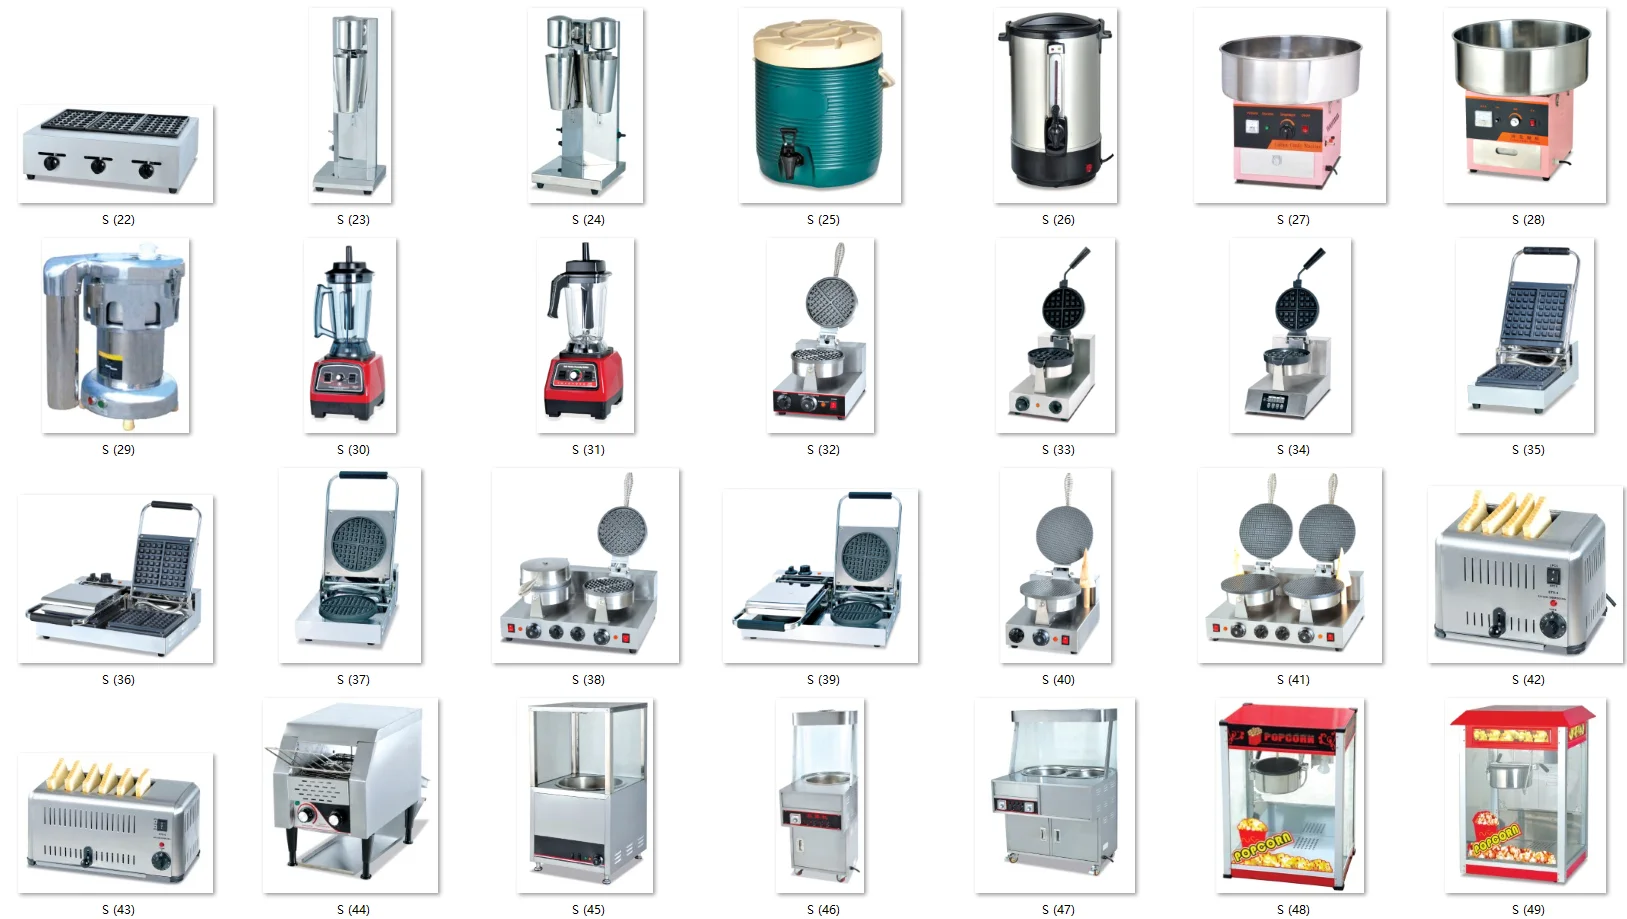 CE Commercial catering other hotel fast snack food machiner cocina industrial & Restaurant Equipment supplies kitchen equipments